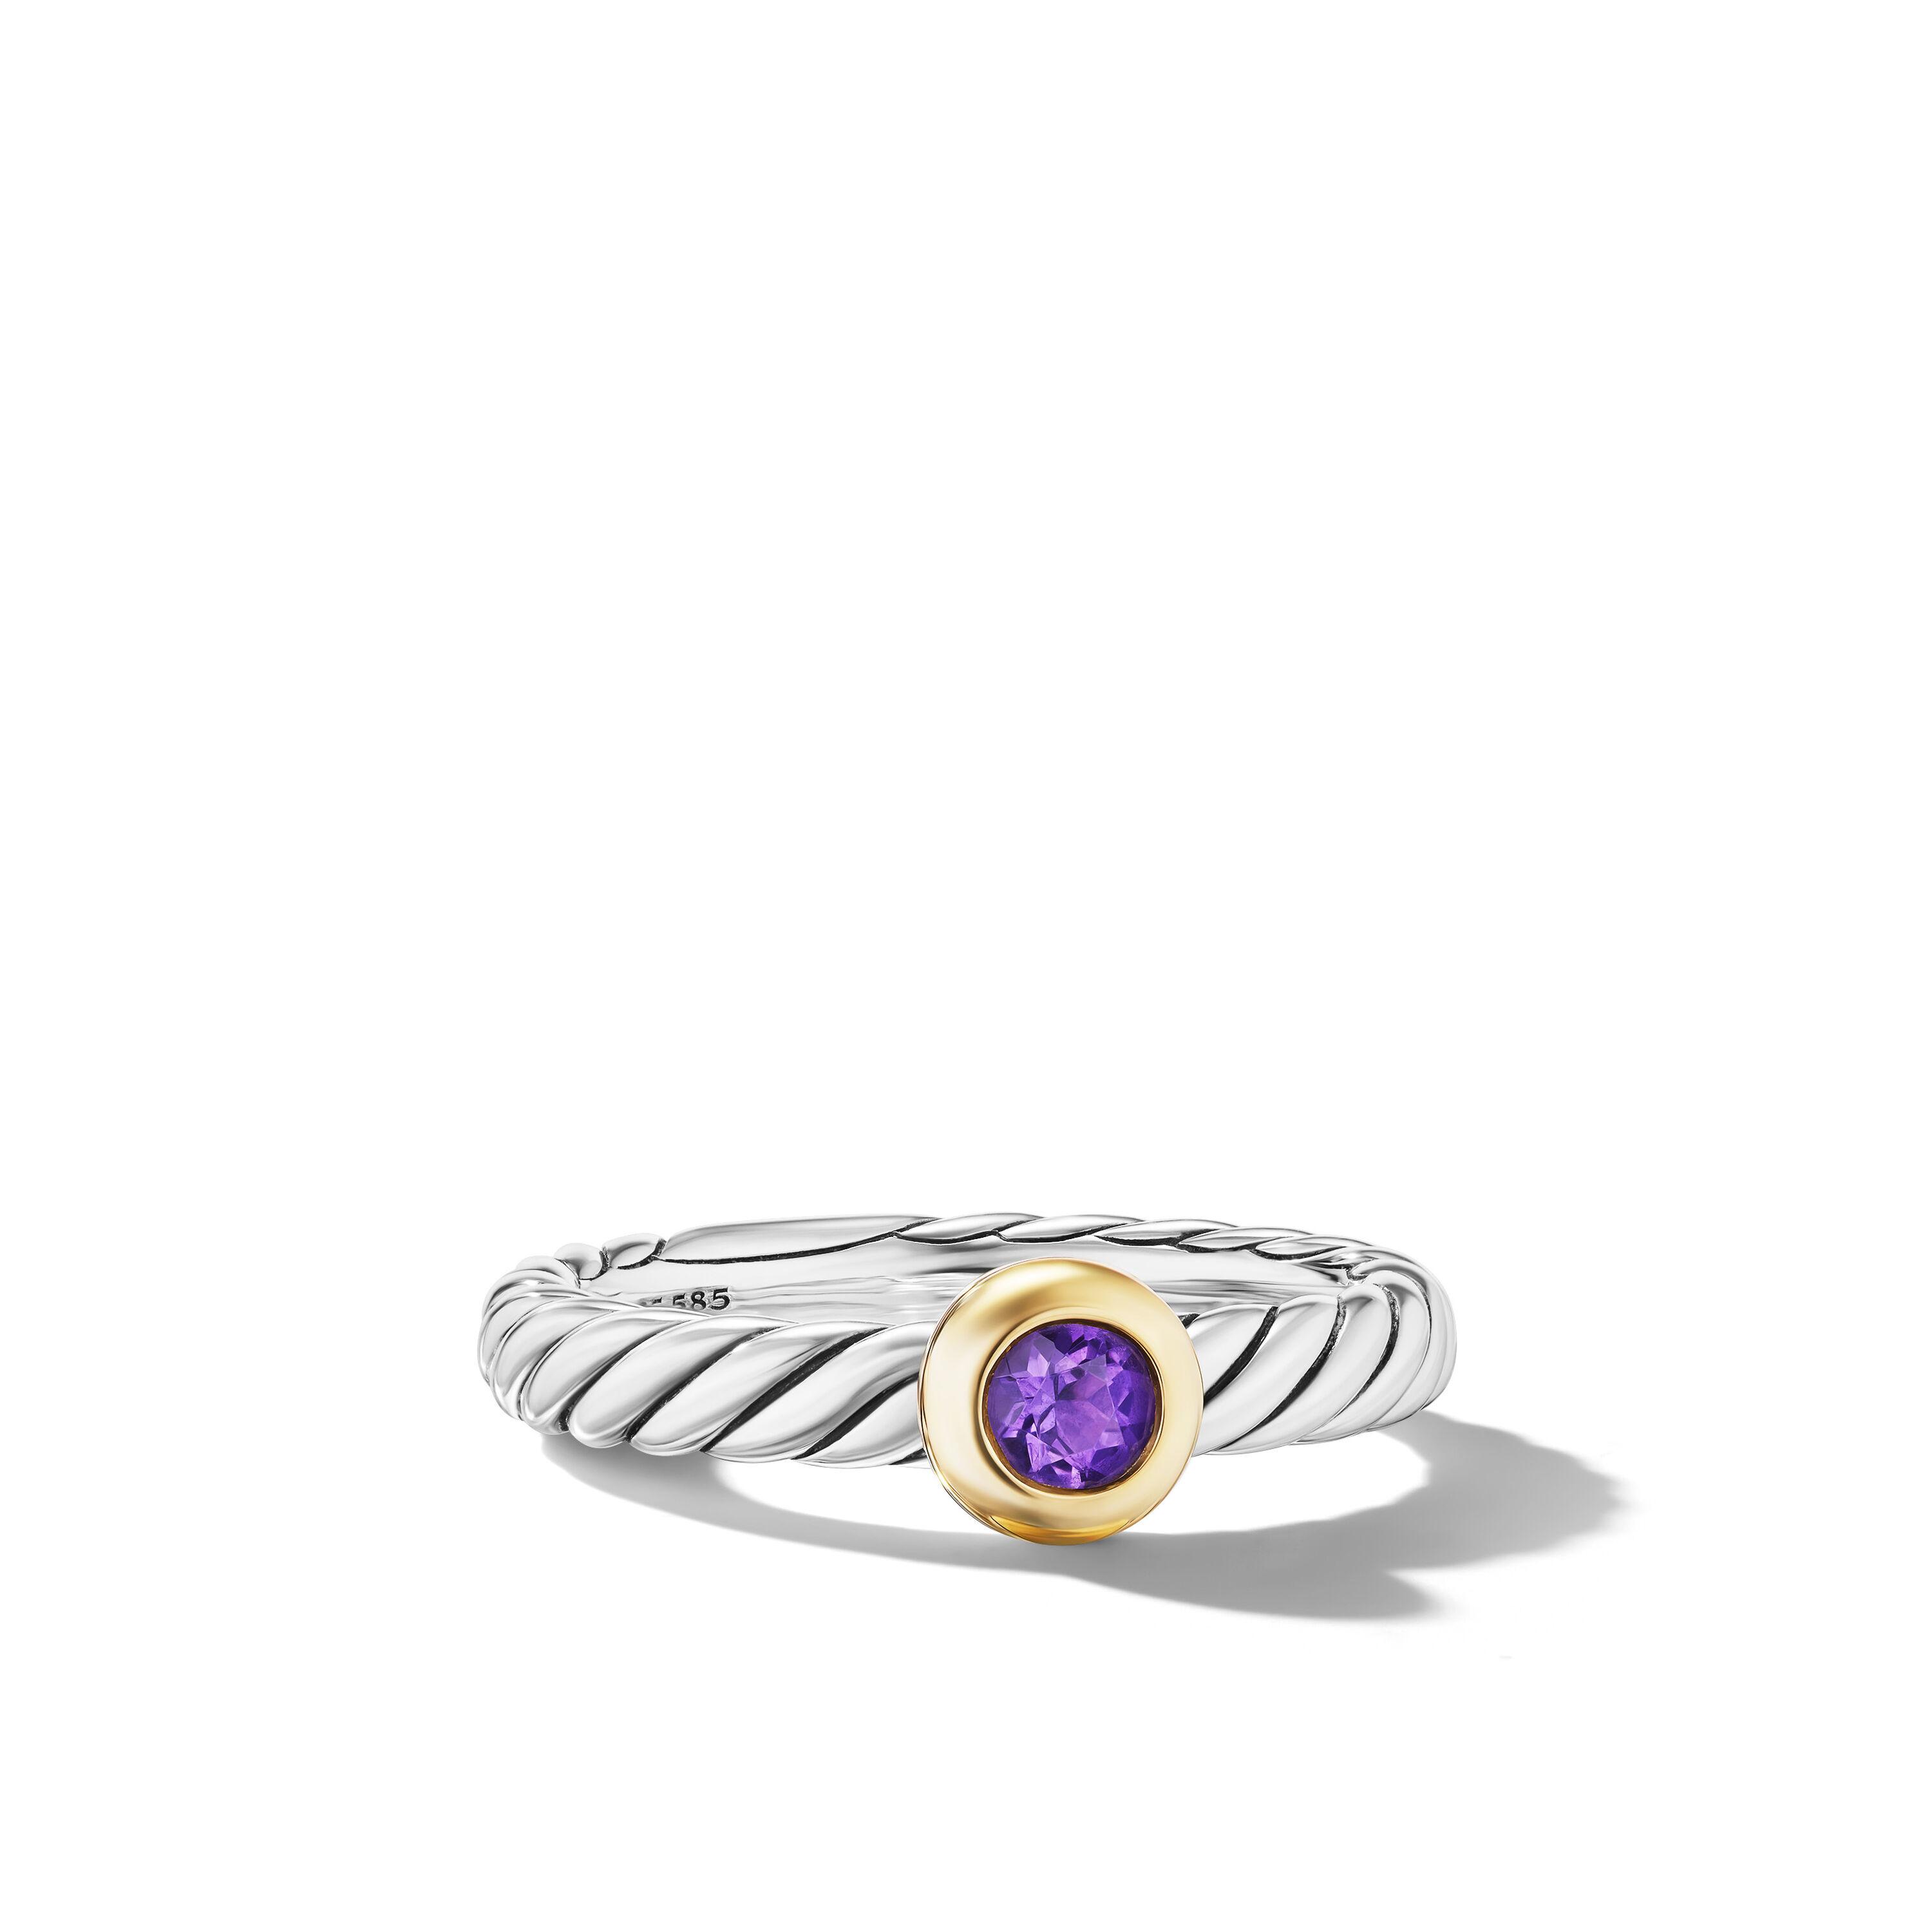 David Yurman Petite Cable Ring in Sterling Silver with 14K Yellow Gold and Amethyst, Size 6 0